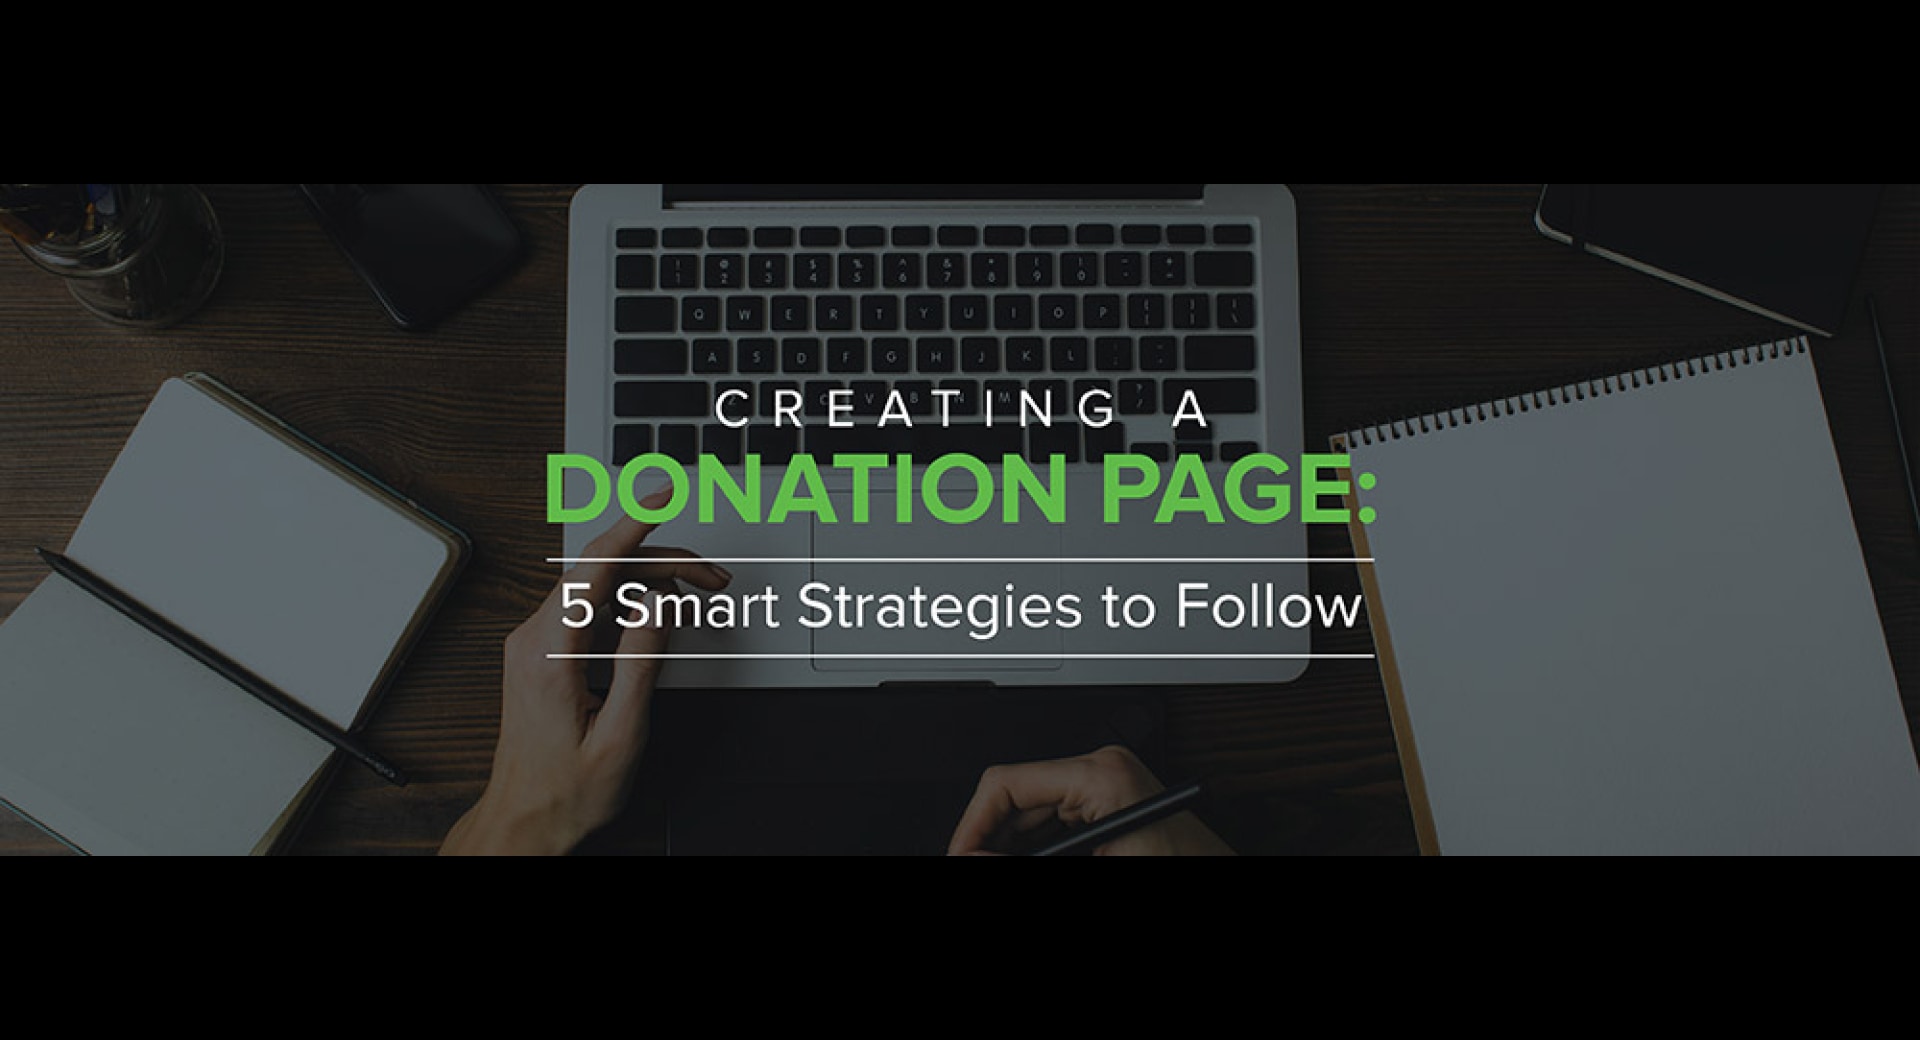 Creating a Donation Page: 5 Smart Strategies to Follow